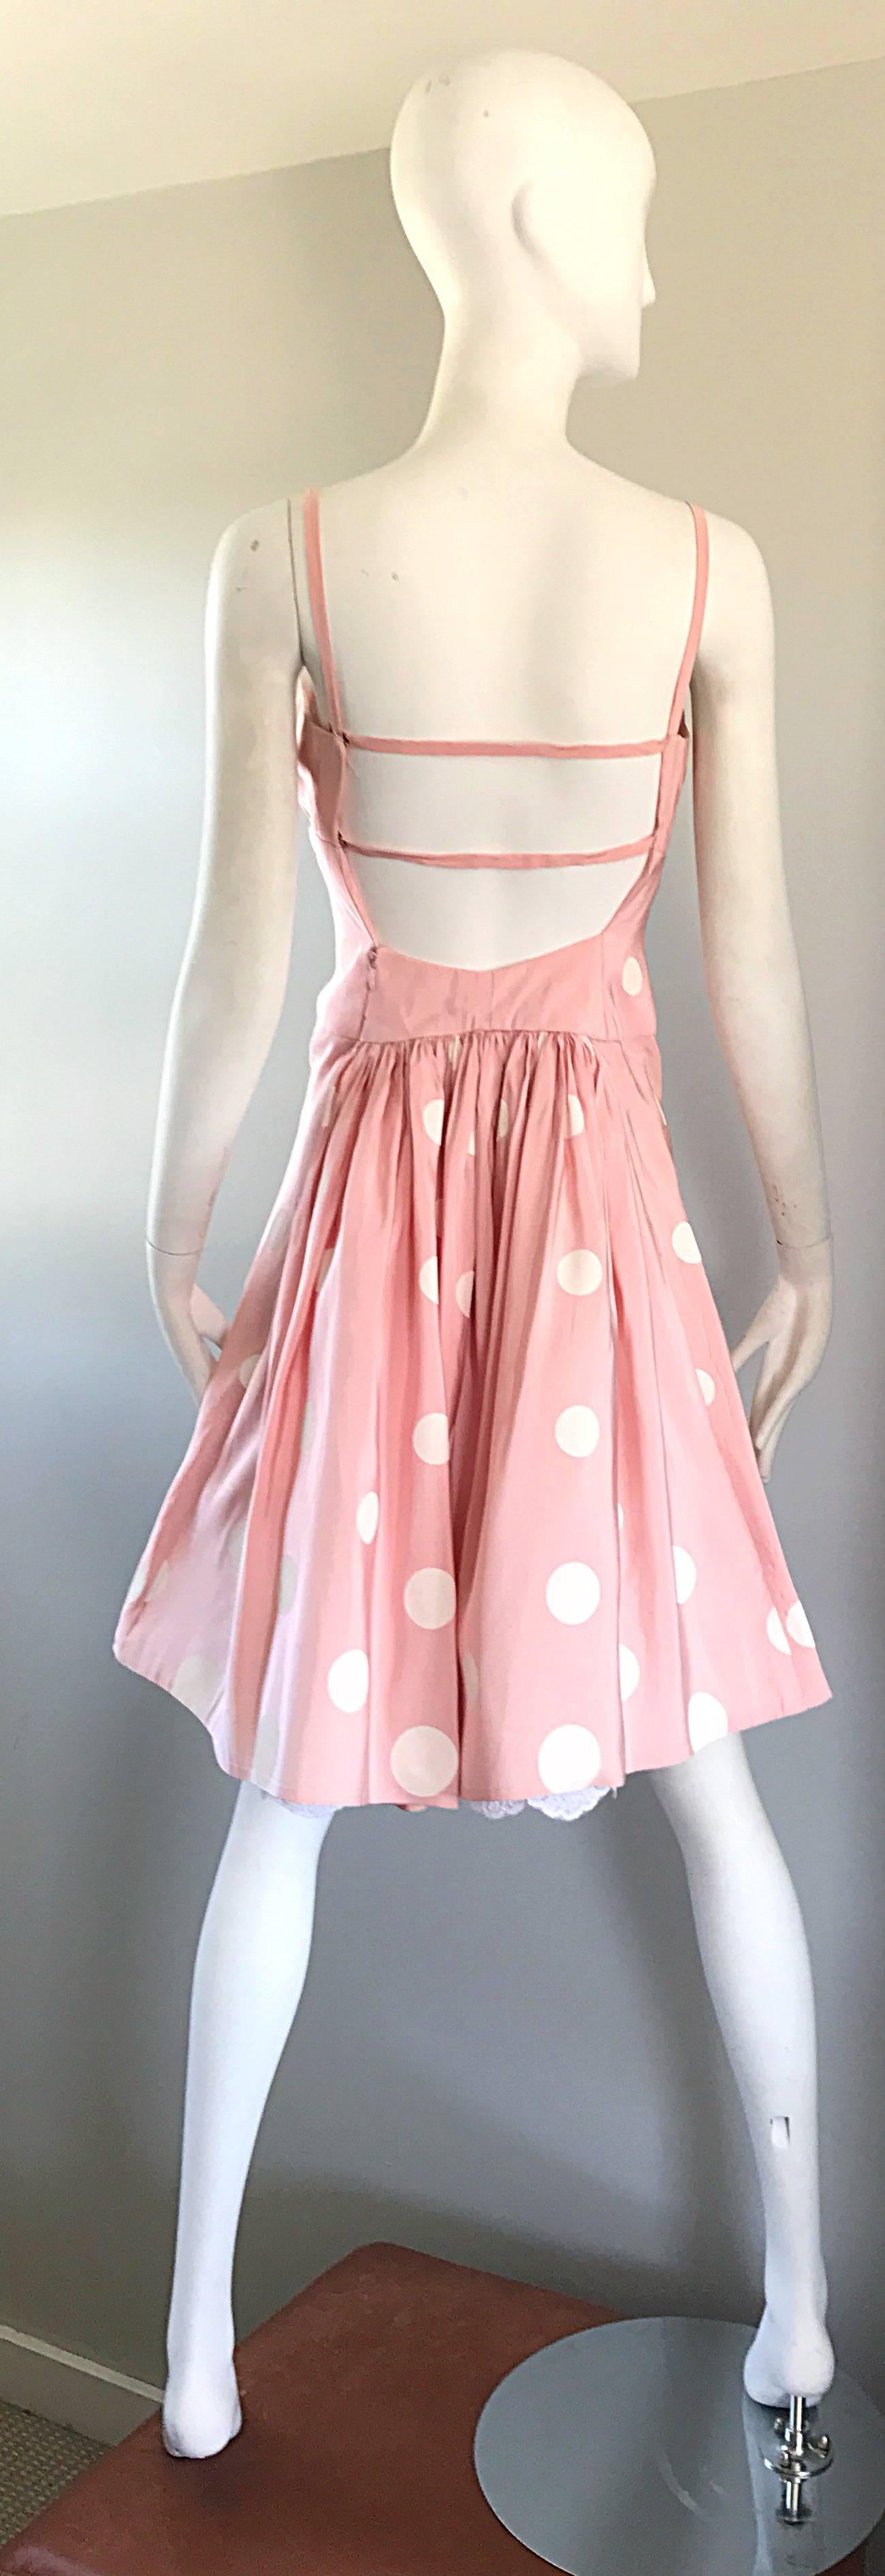 Chic 90s BILL BLASS pale pink and white hand painted polka dot fit n' flare cocktail silk taffeta dress! Features large handpainted polka dots throughout. Attached white lace underlay peeks through at the back hem. Peek-a-boo back with a center